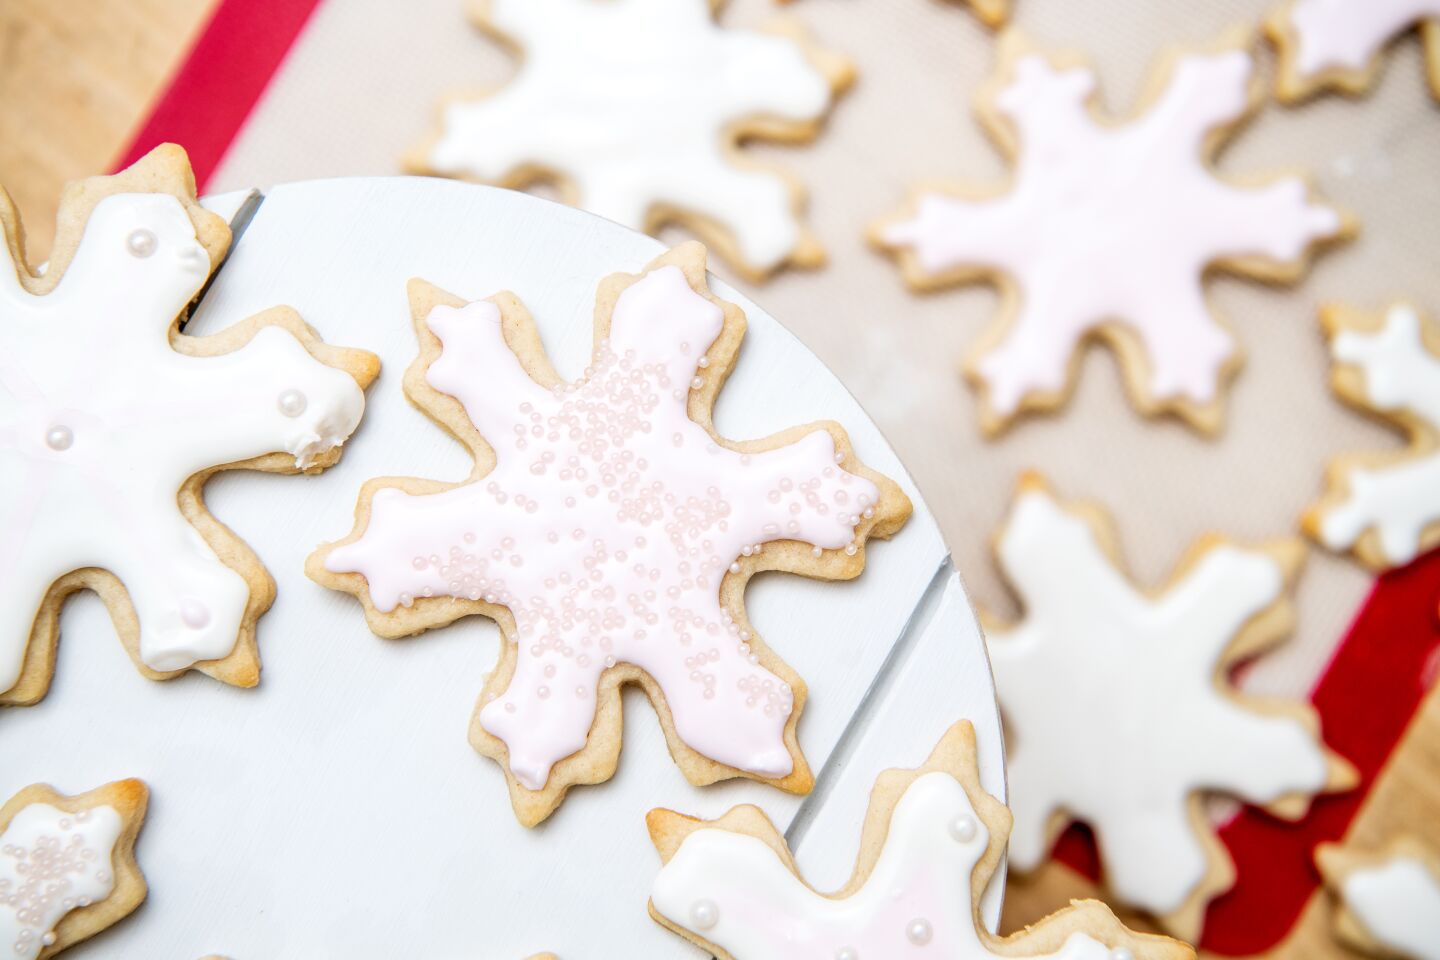 Frosted sugar cookies are a Saeta holiday tradition.